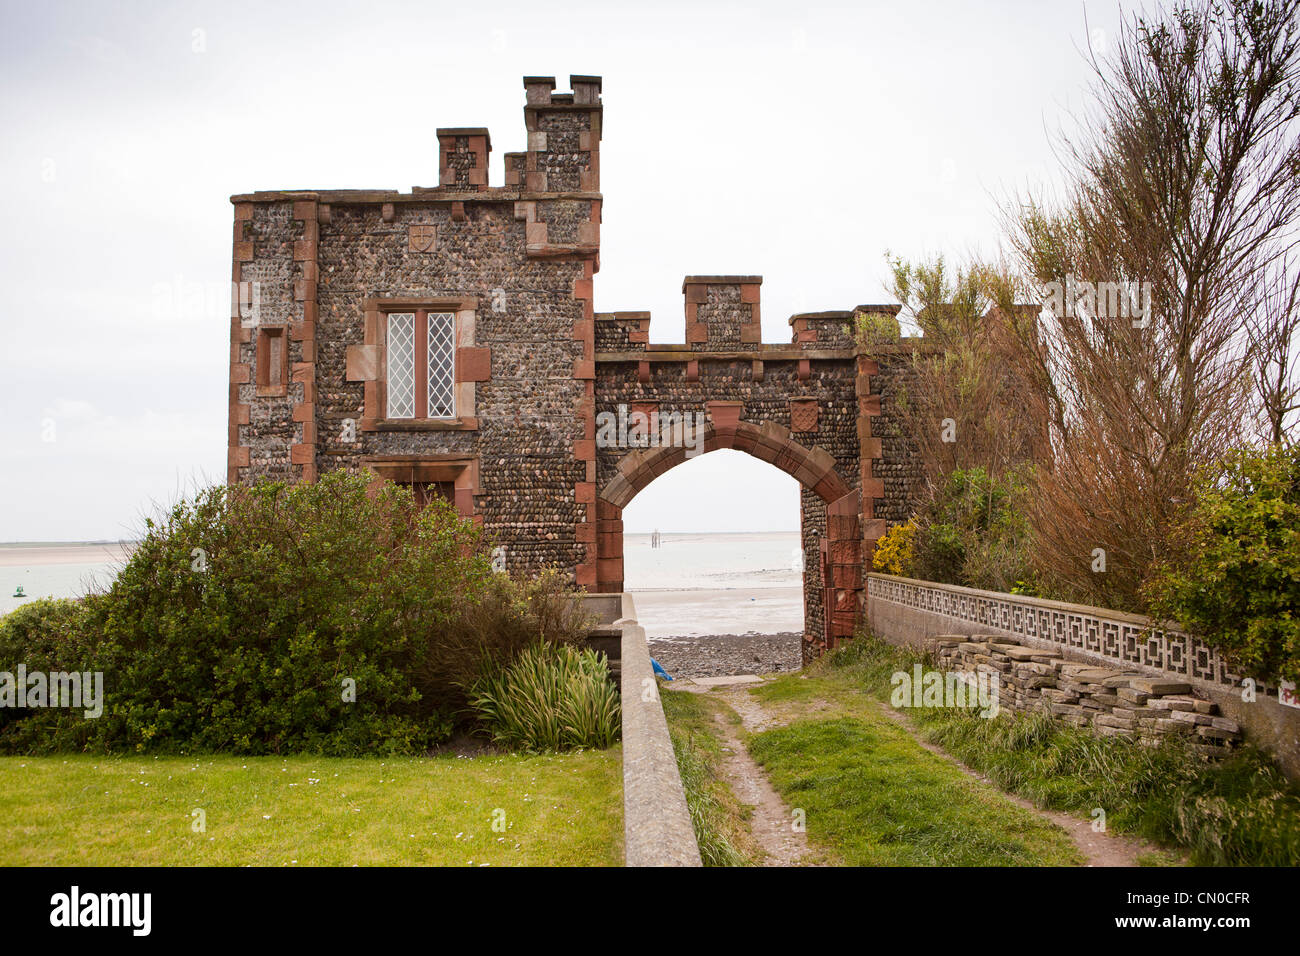 UK, Cumbria, Barrow in Furness, Roa Island, Douanes et Accise House et Walney Channel watch tower Banque D'Images